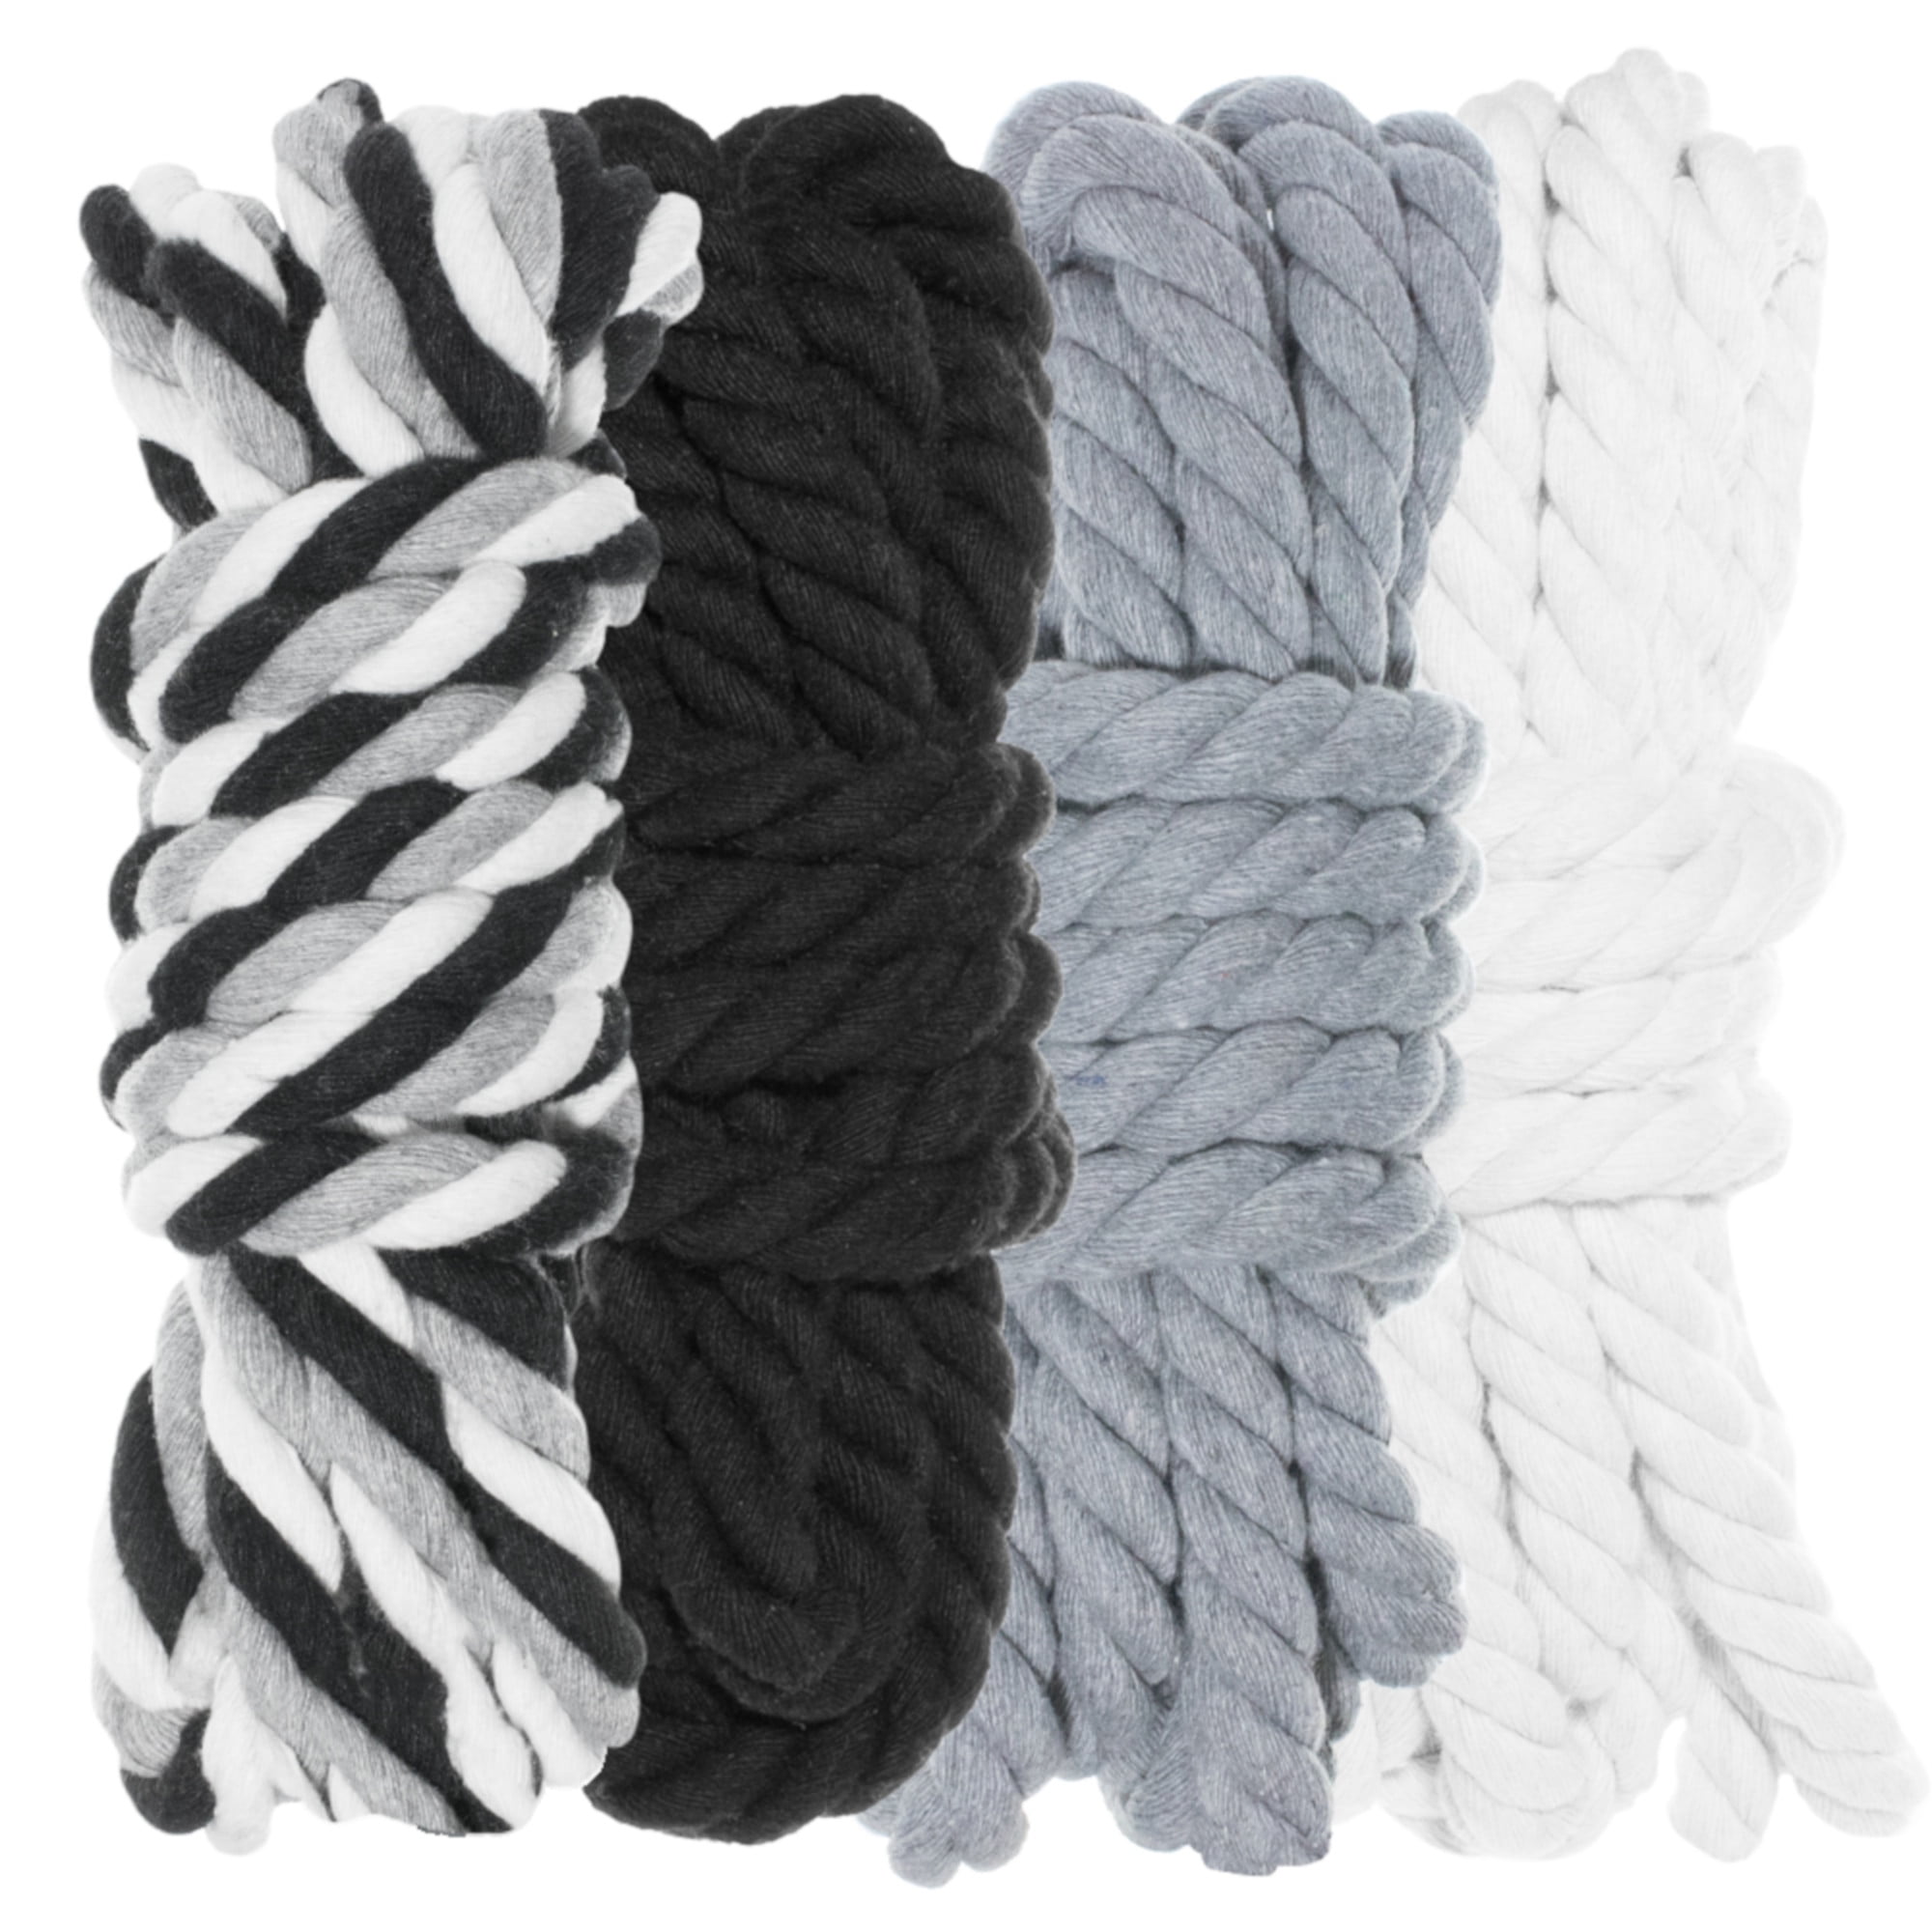 WHITE Polypropylene Rope Coils Poly Rope Nylon Sailing Agriculture Cut Lengths 